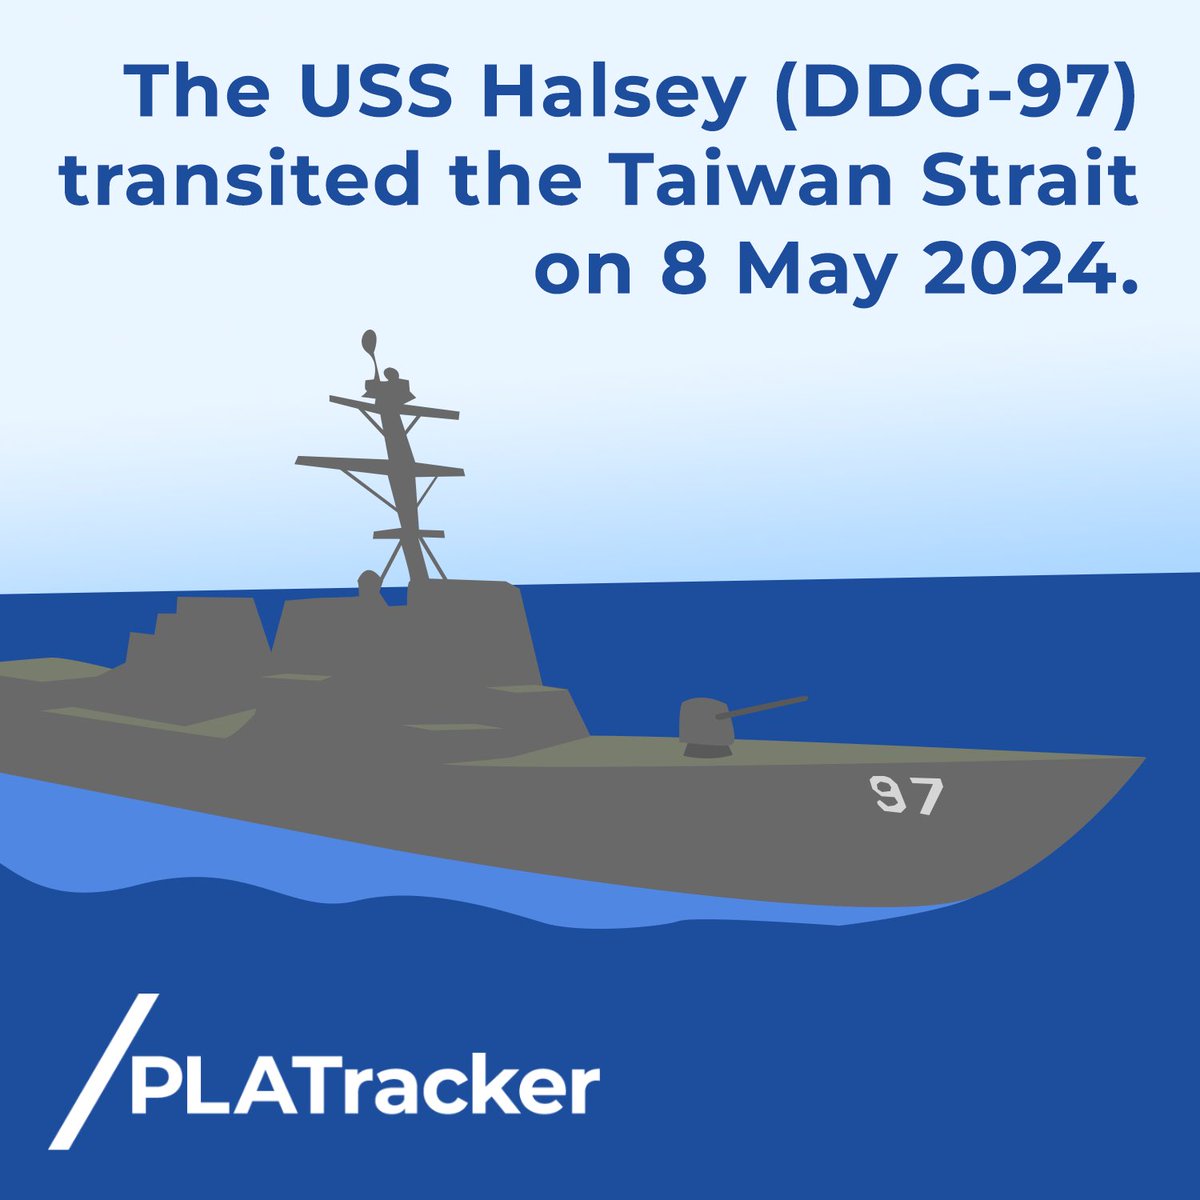 The USS Halsey (DDG-97) transited the Taiwan Strait at 0700 Taipei time on 8 May 2024. Find out more here: docs.google.com/spreadsheets/d…